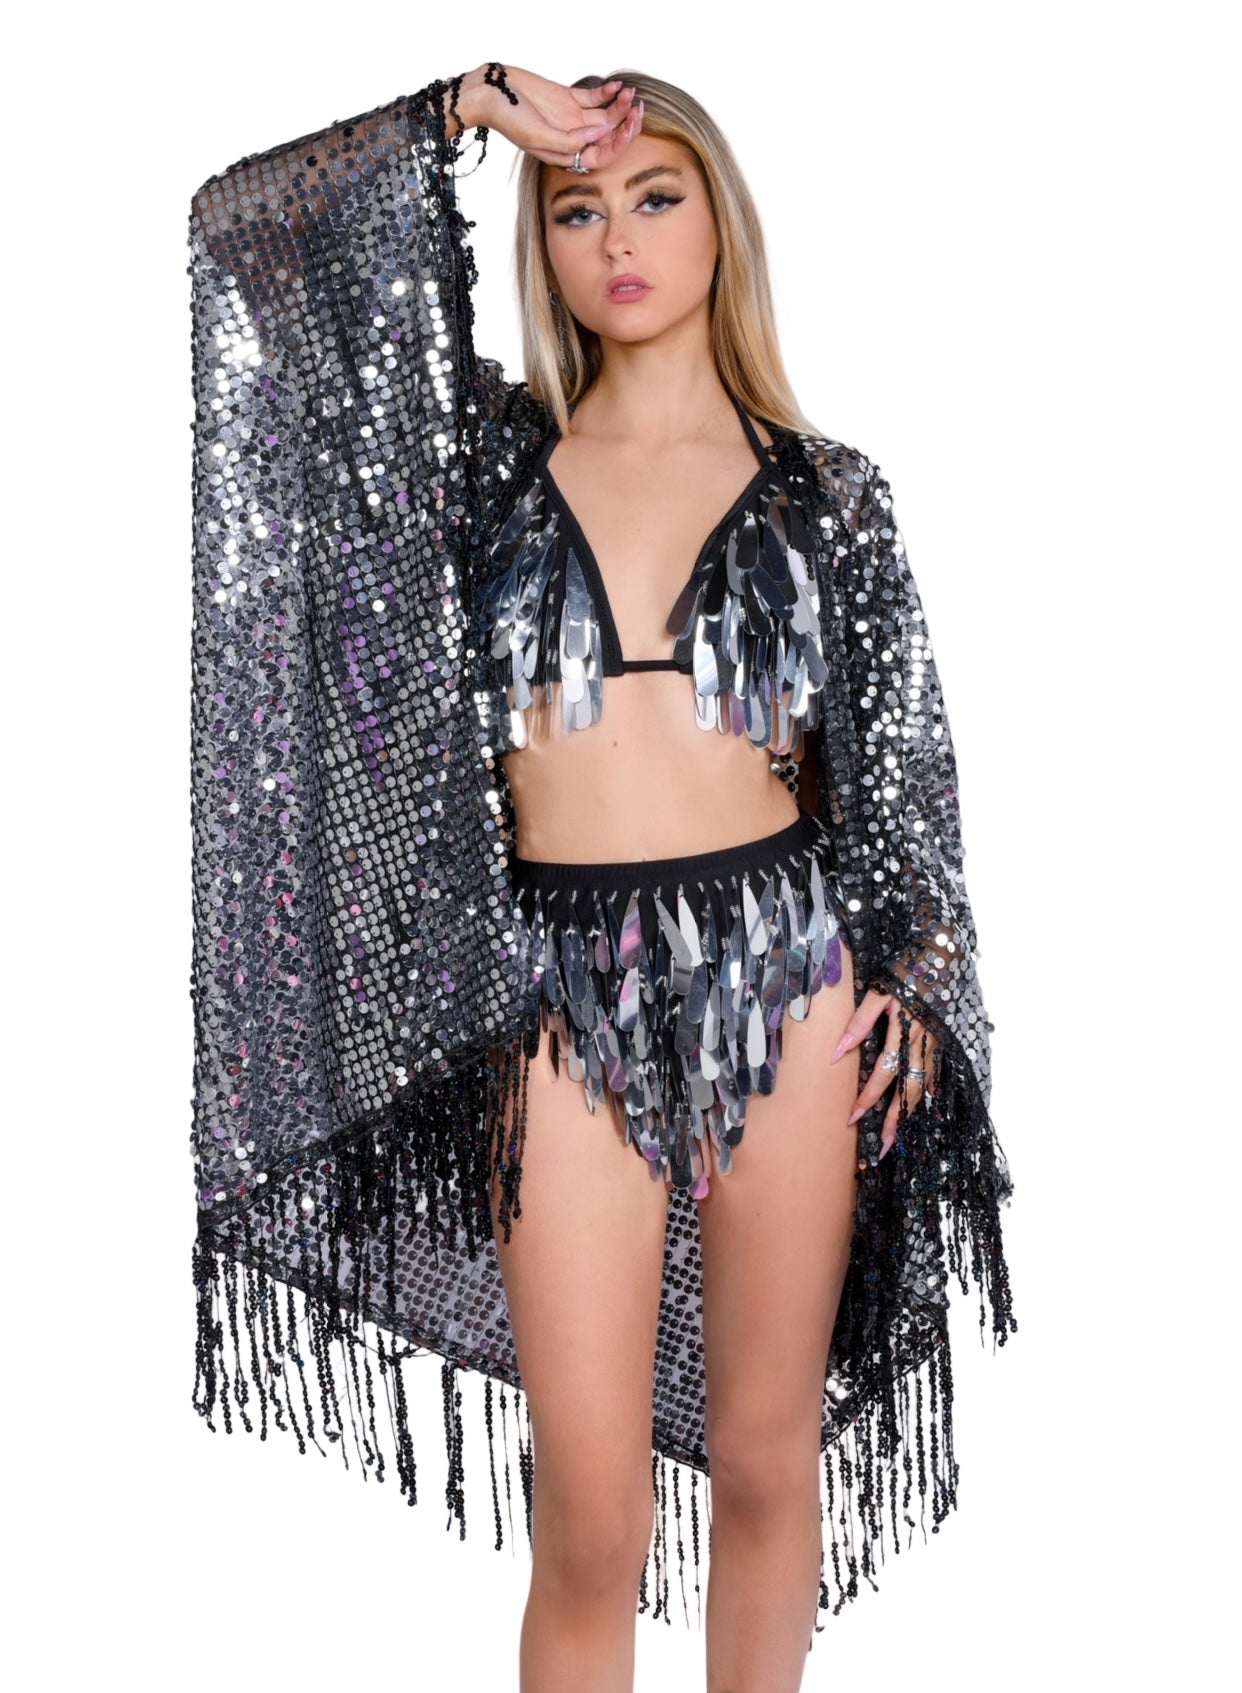 FULL OUTFIT- Black Disco Ball